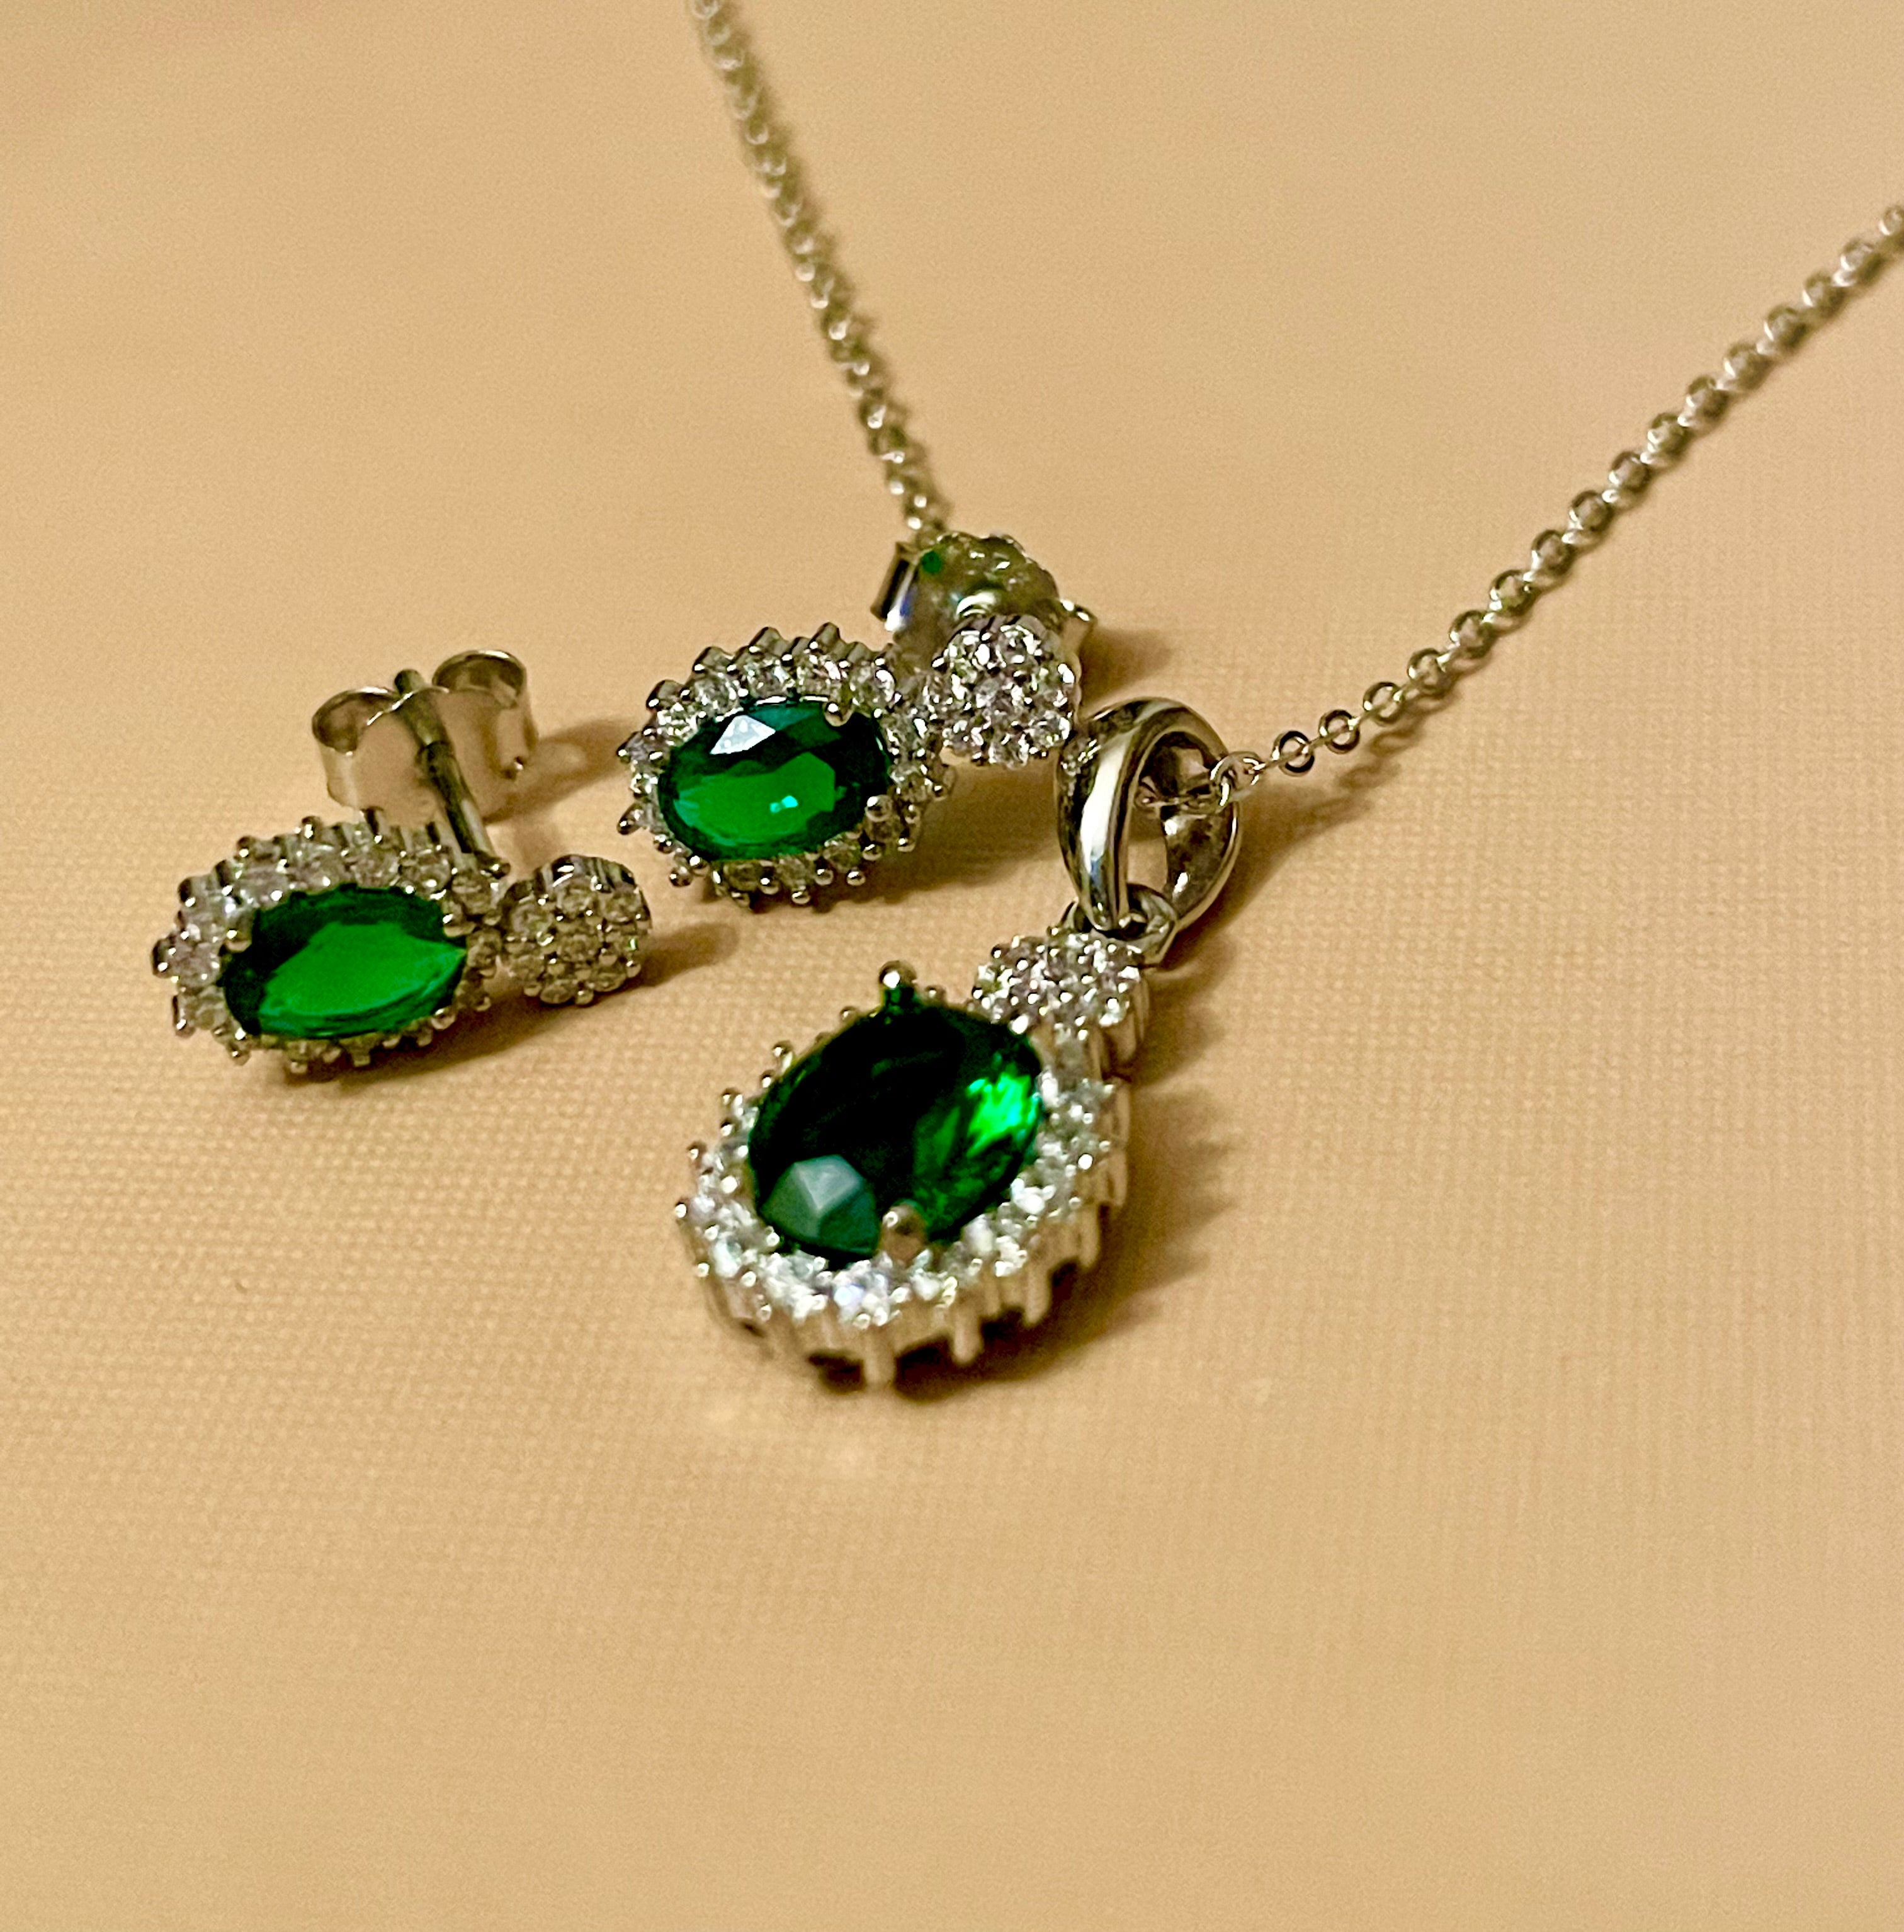 Emerald Necklaces | Oval Shape Emerald Necklaces and Earring Set In  Sterling Silver, 18 Inch Chain